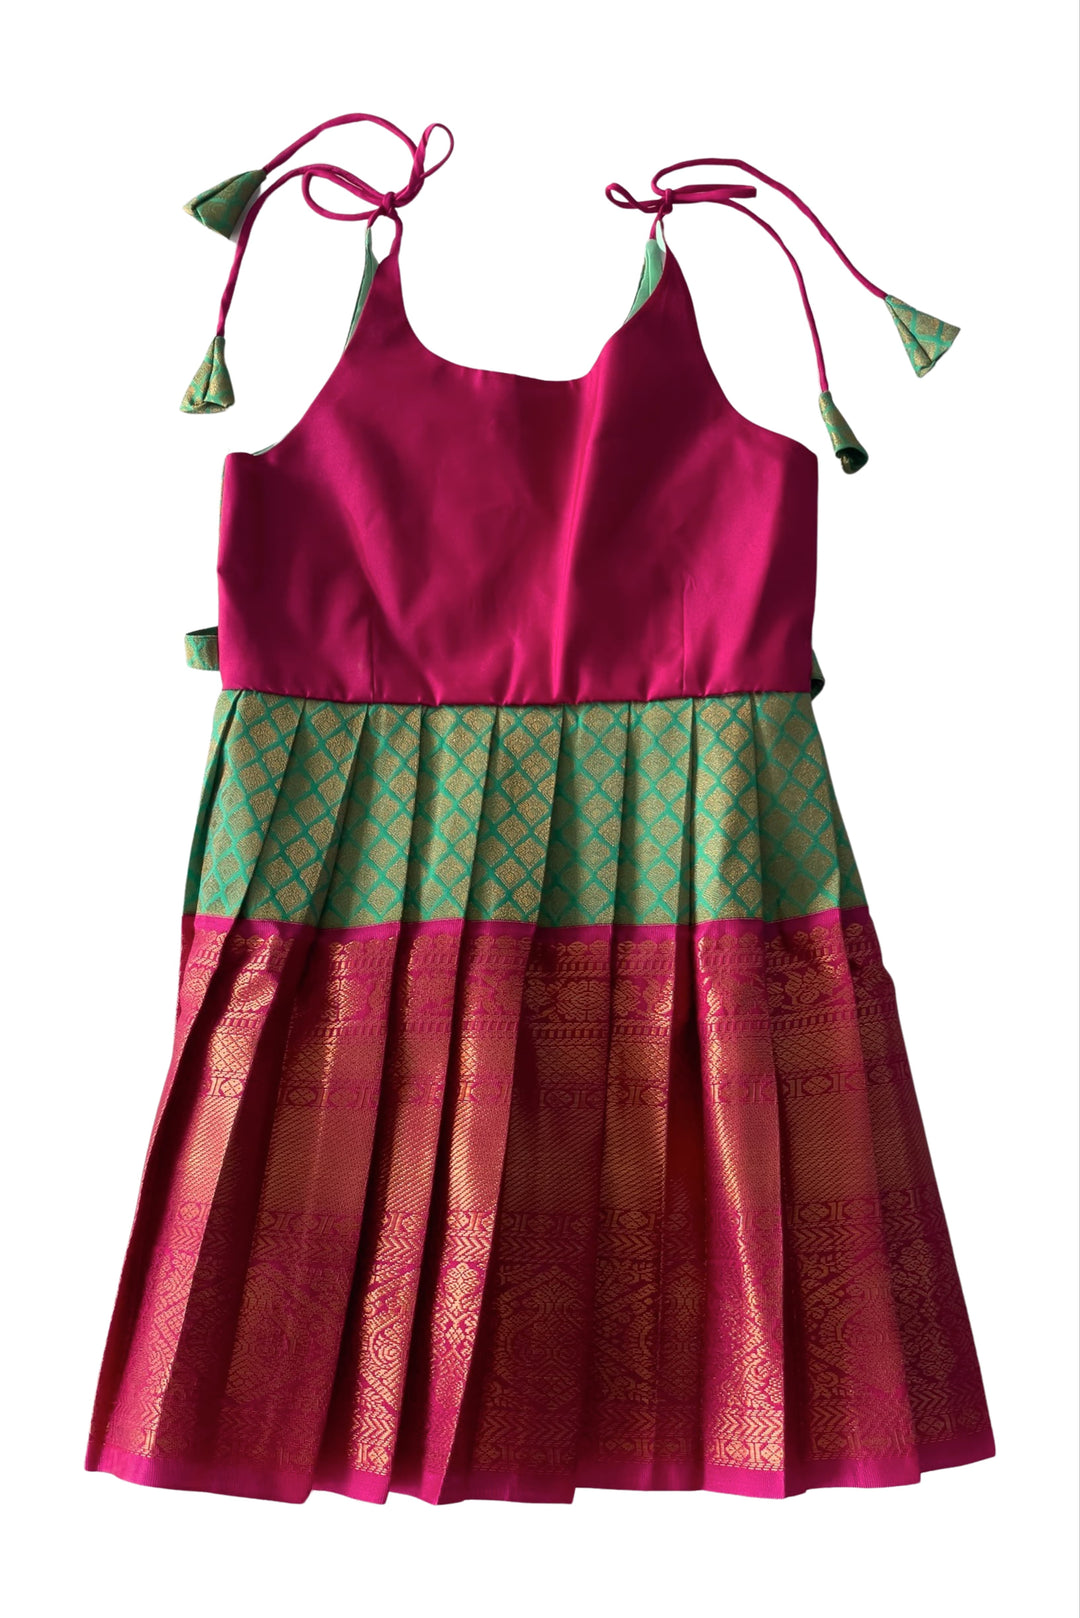 The Nesavu Tie-up Frock Chic Magenta and Green Tie-Up Silk Frock for Girls - Traditional Elegance Nesavu 14 (6M) / Green / Style 2 T304B-14 Girls Magenta & Green Silk Frock | Festive Tie-Up Design | Classic Cultural Attire | The Nesavu